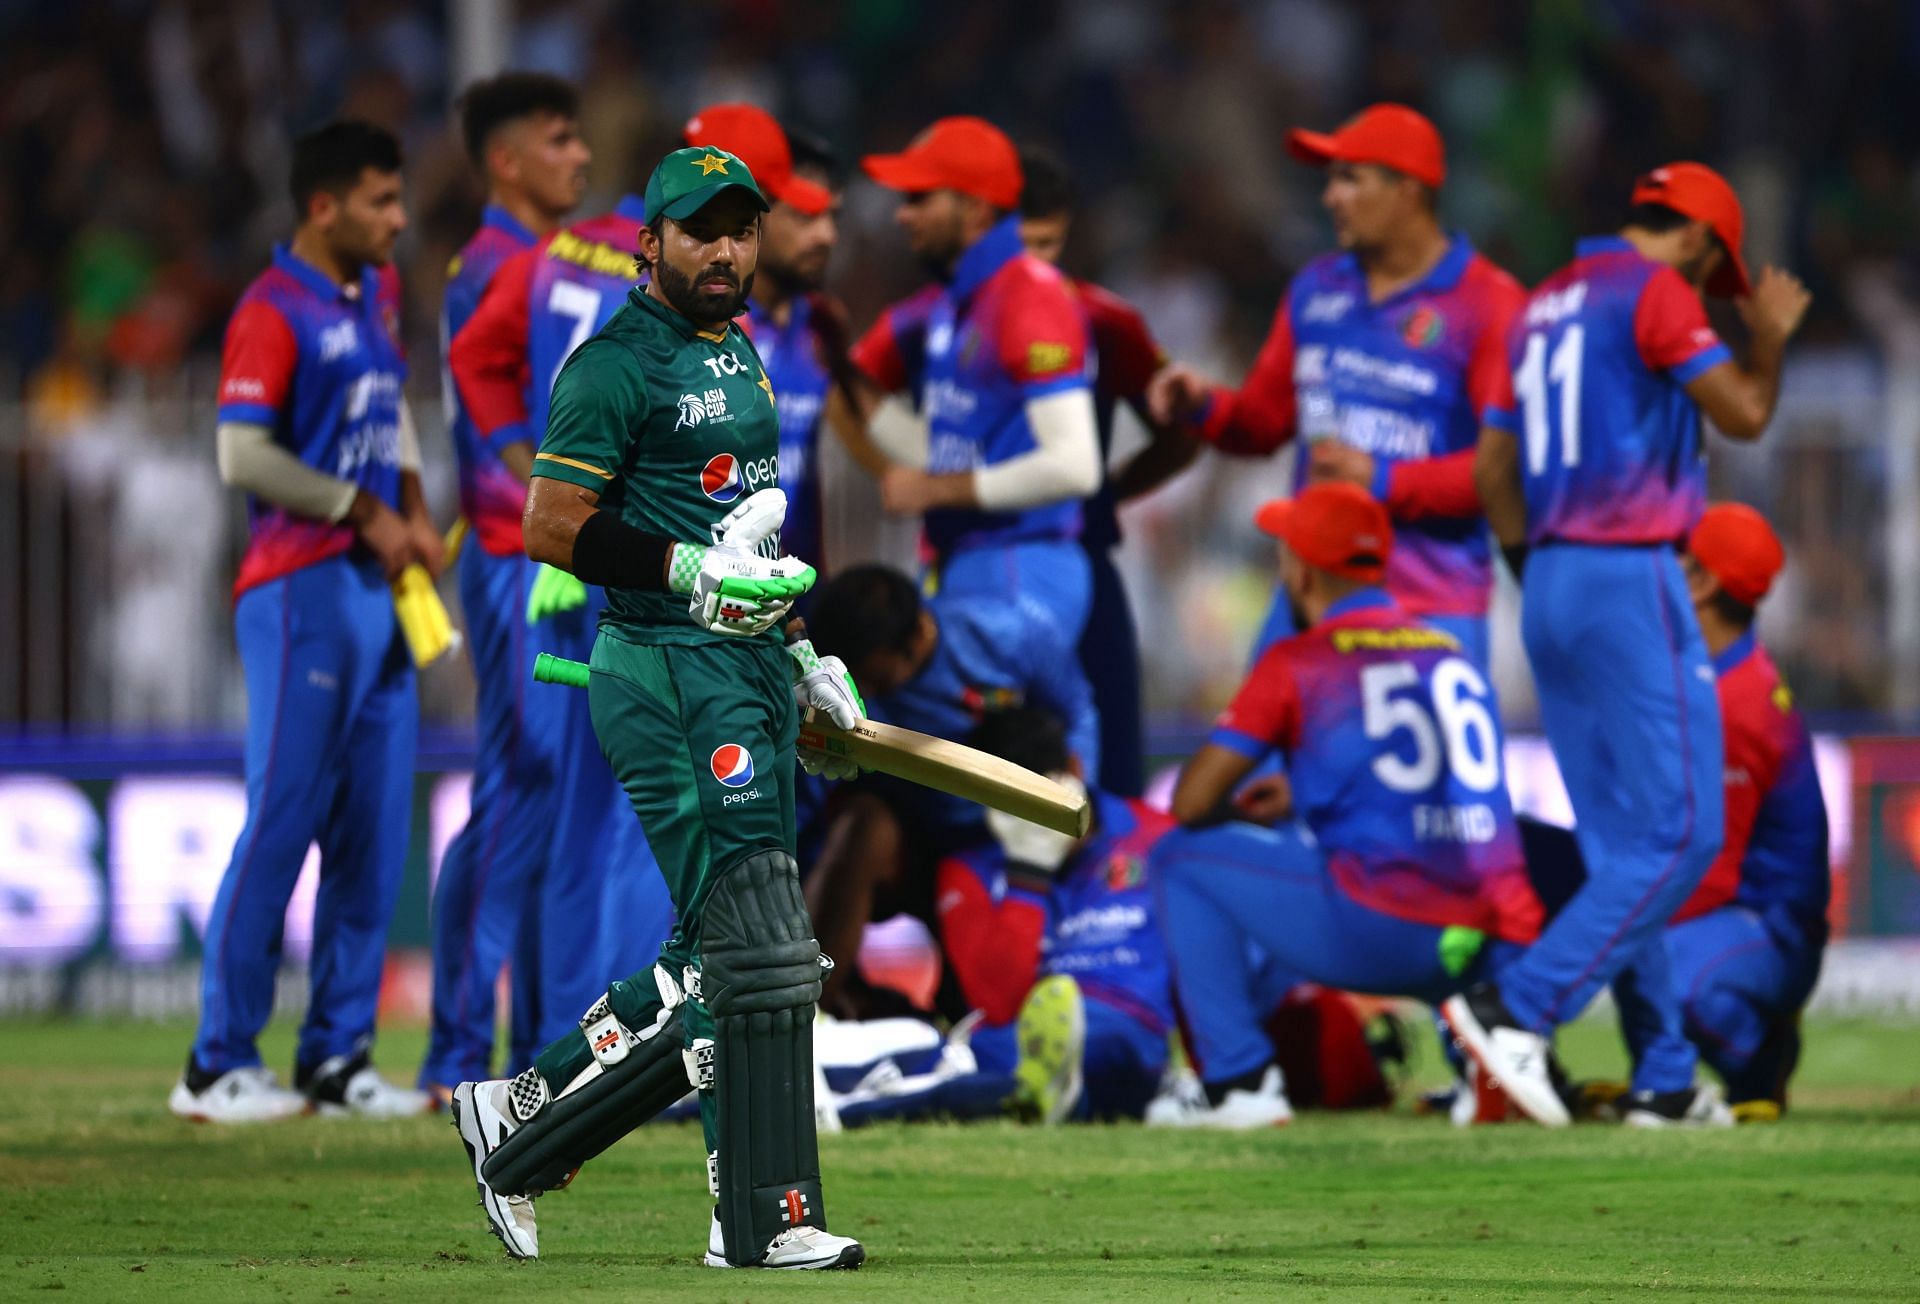 Afghanistan rarely get to play games against the top teams.